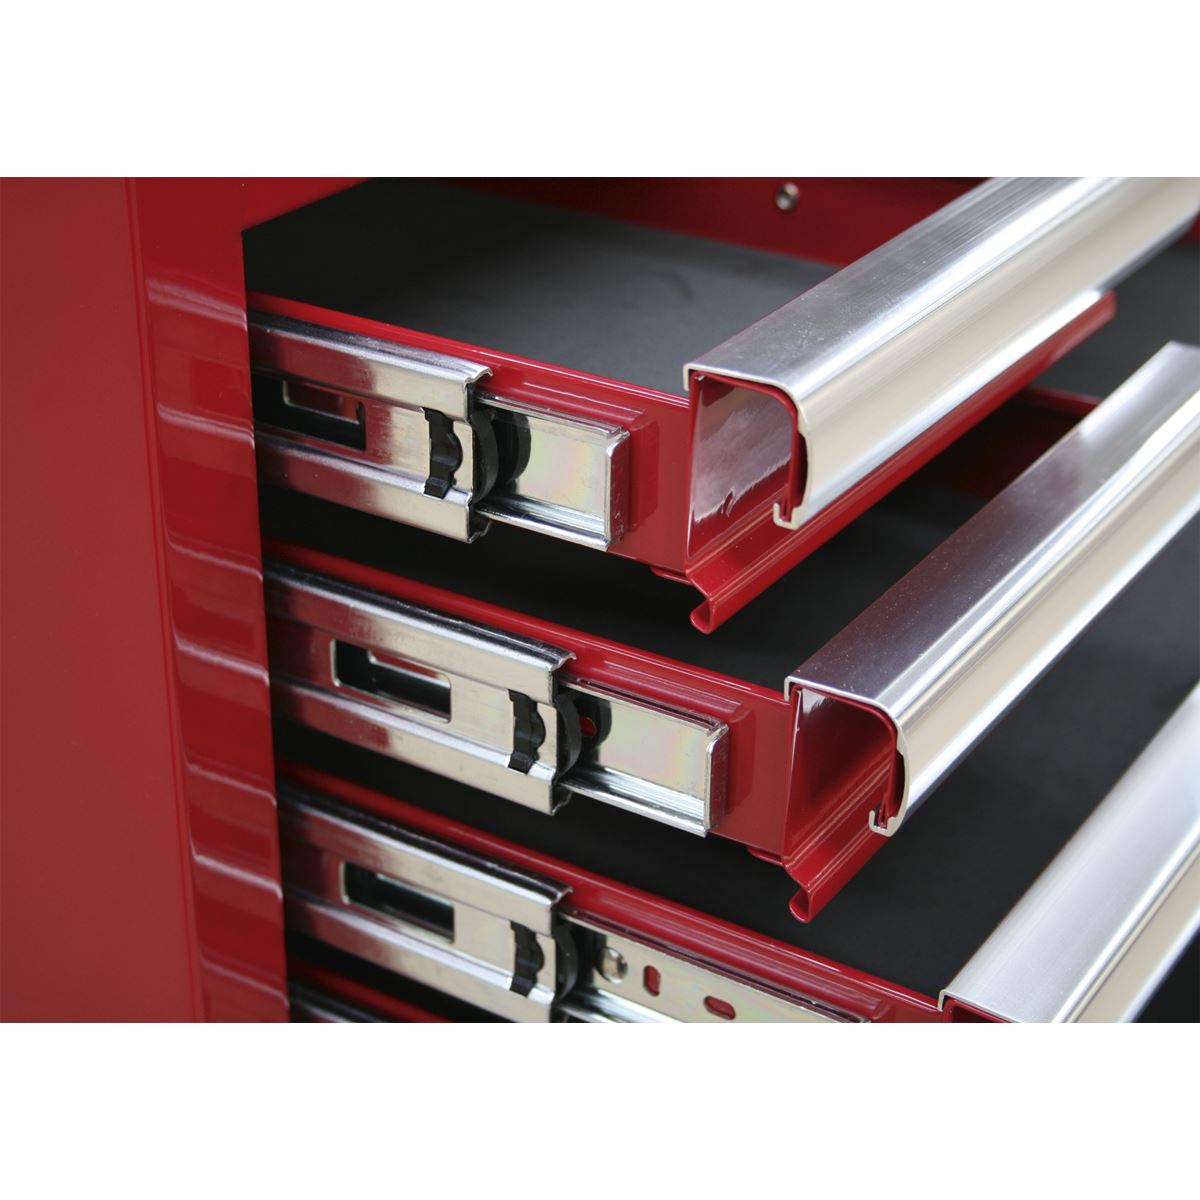 Sealey Superline Pro Mid-Box 1 Drawer with Ball-Bearing Slides Heavy-Duty- Red